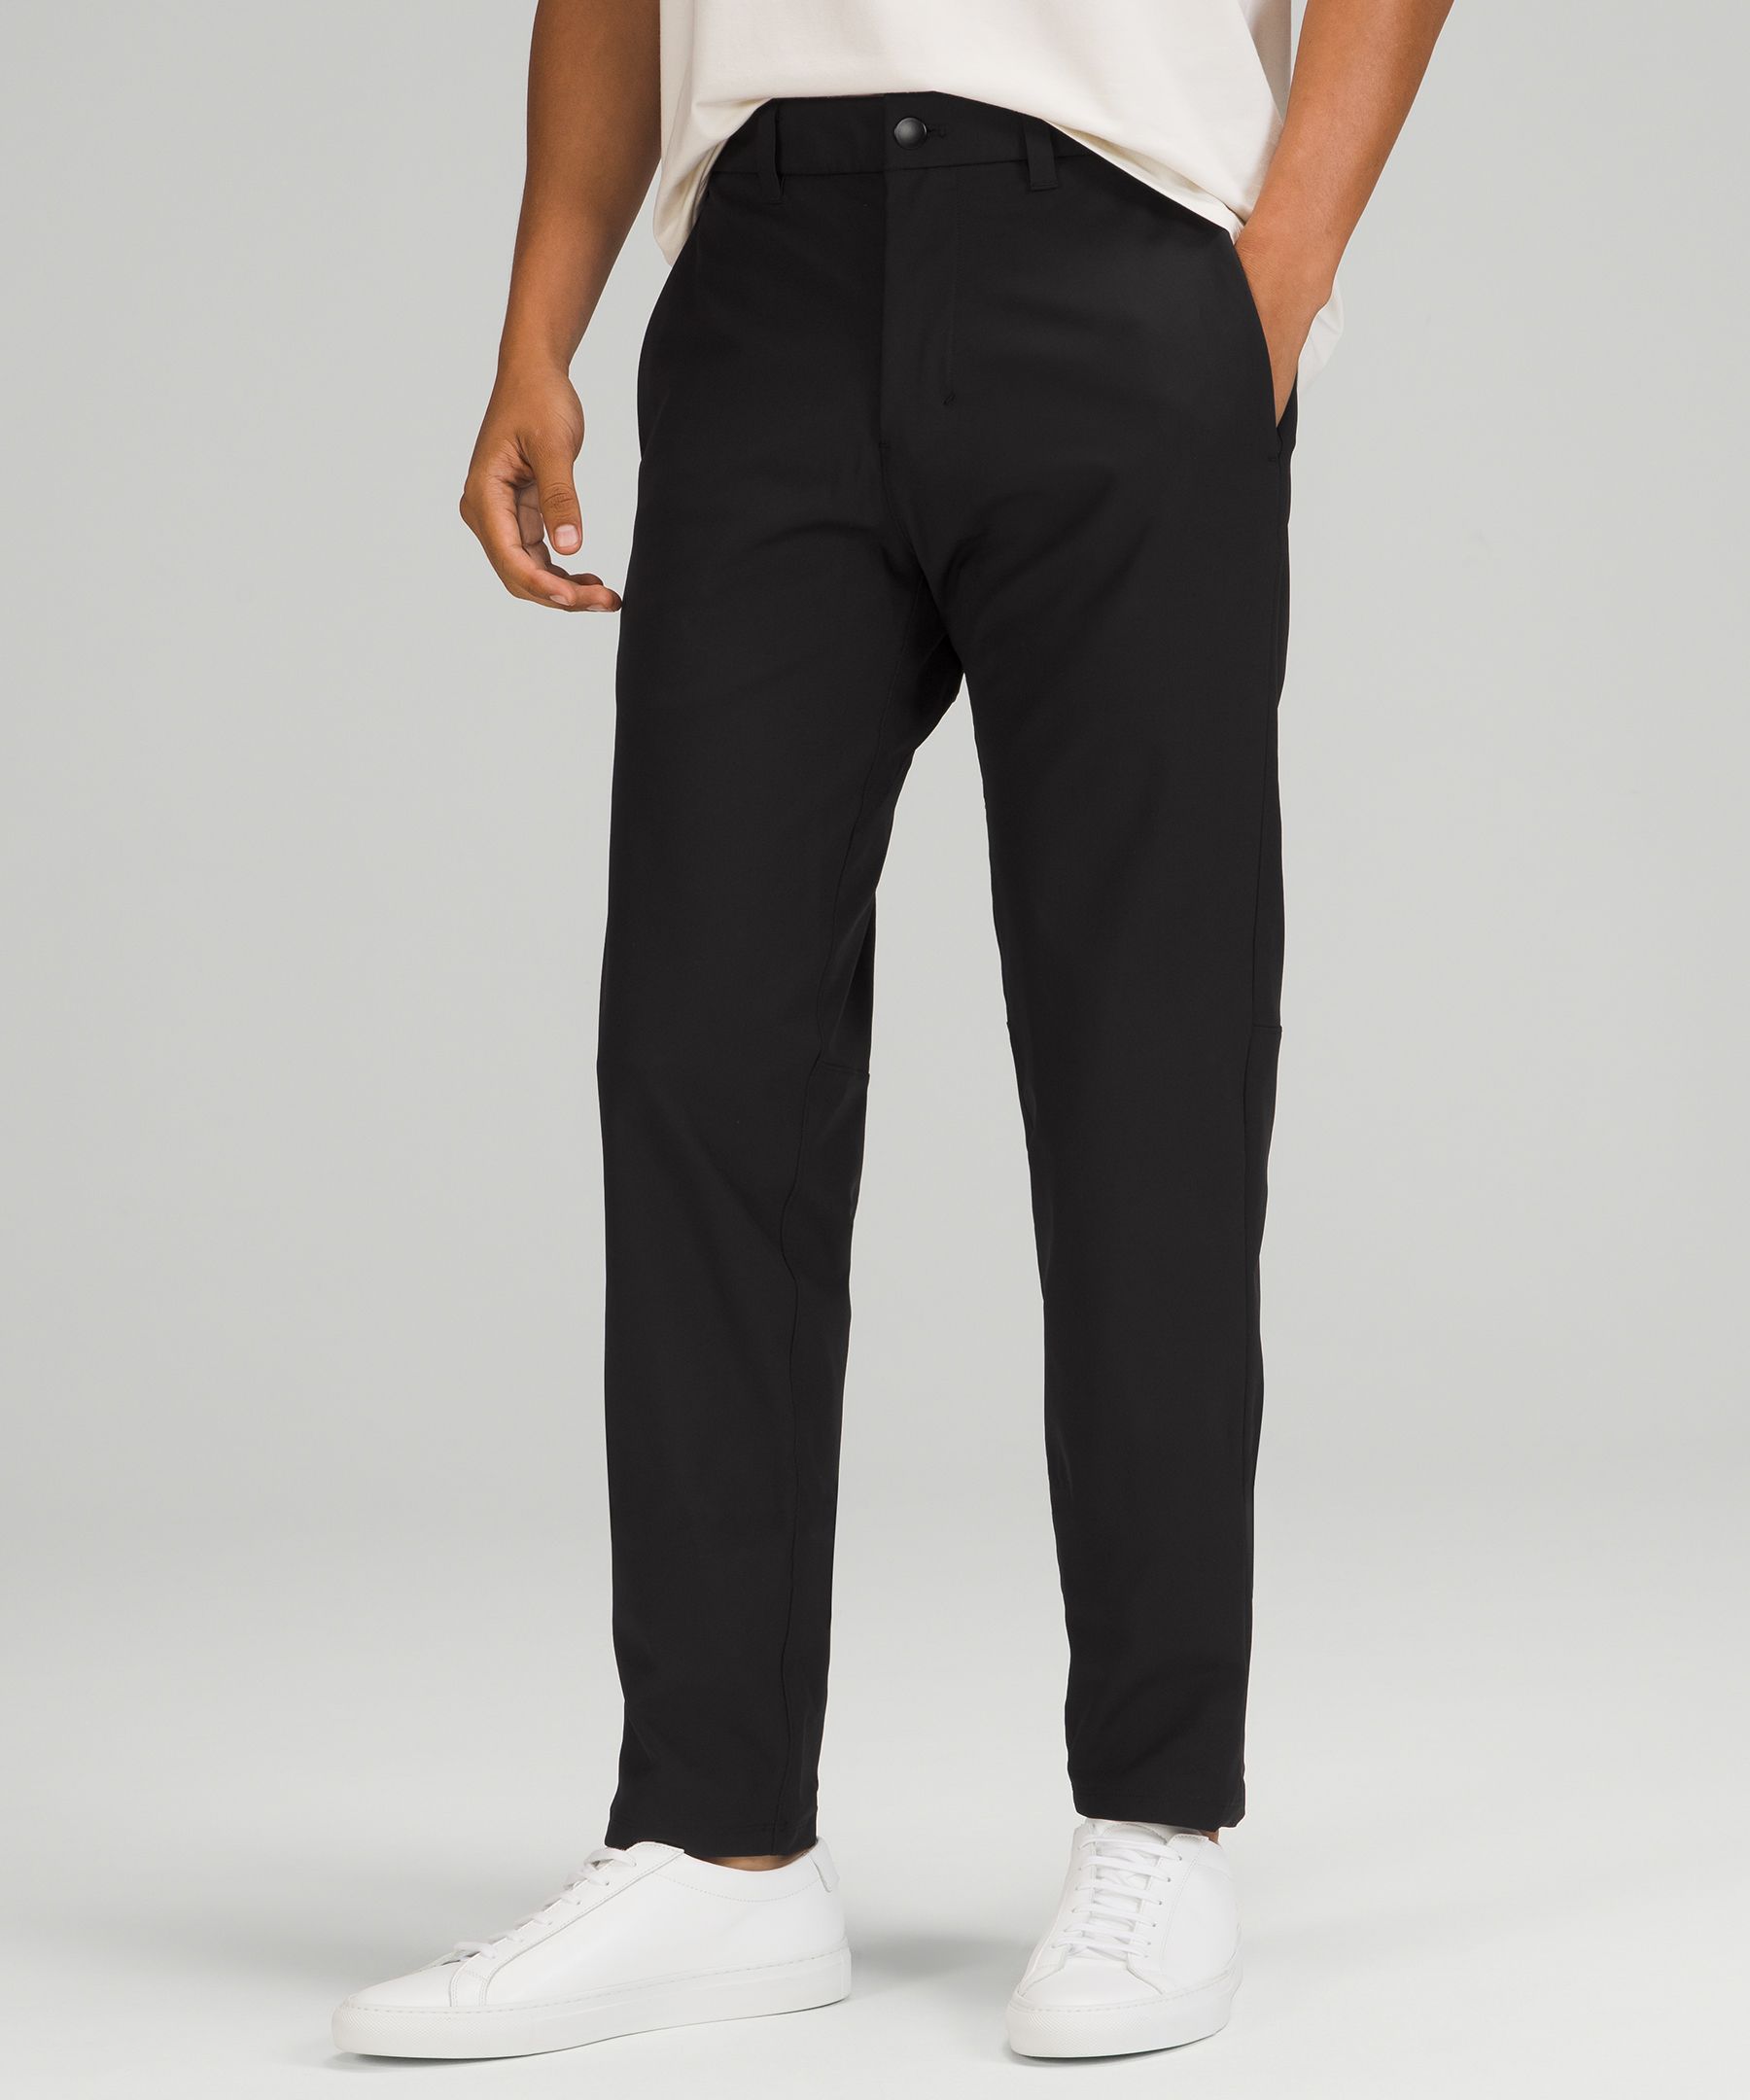 lululemon great wall pant review